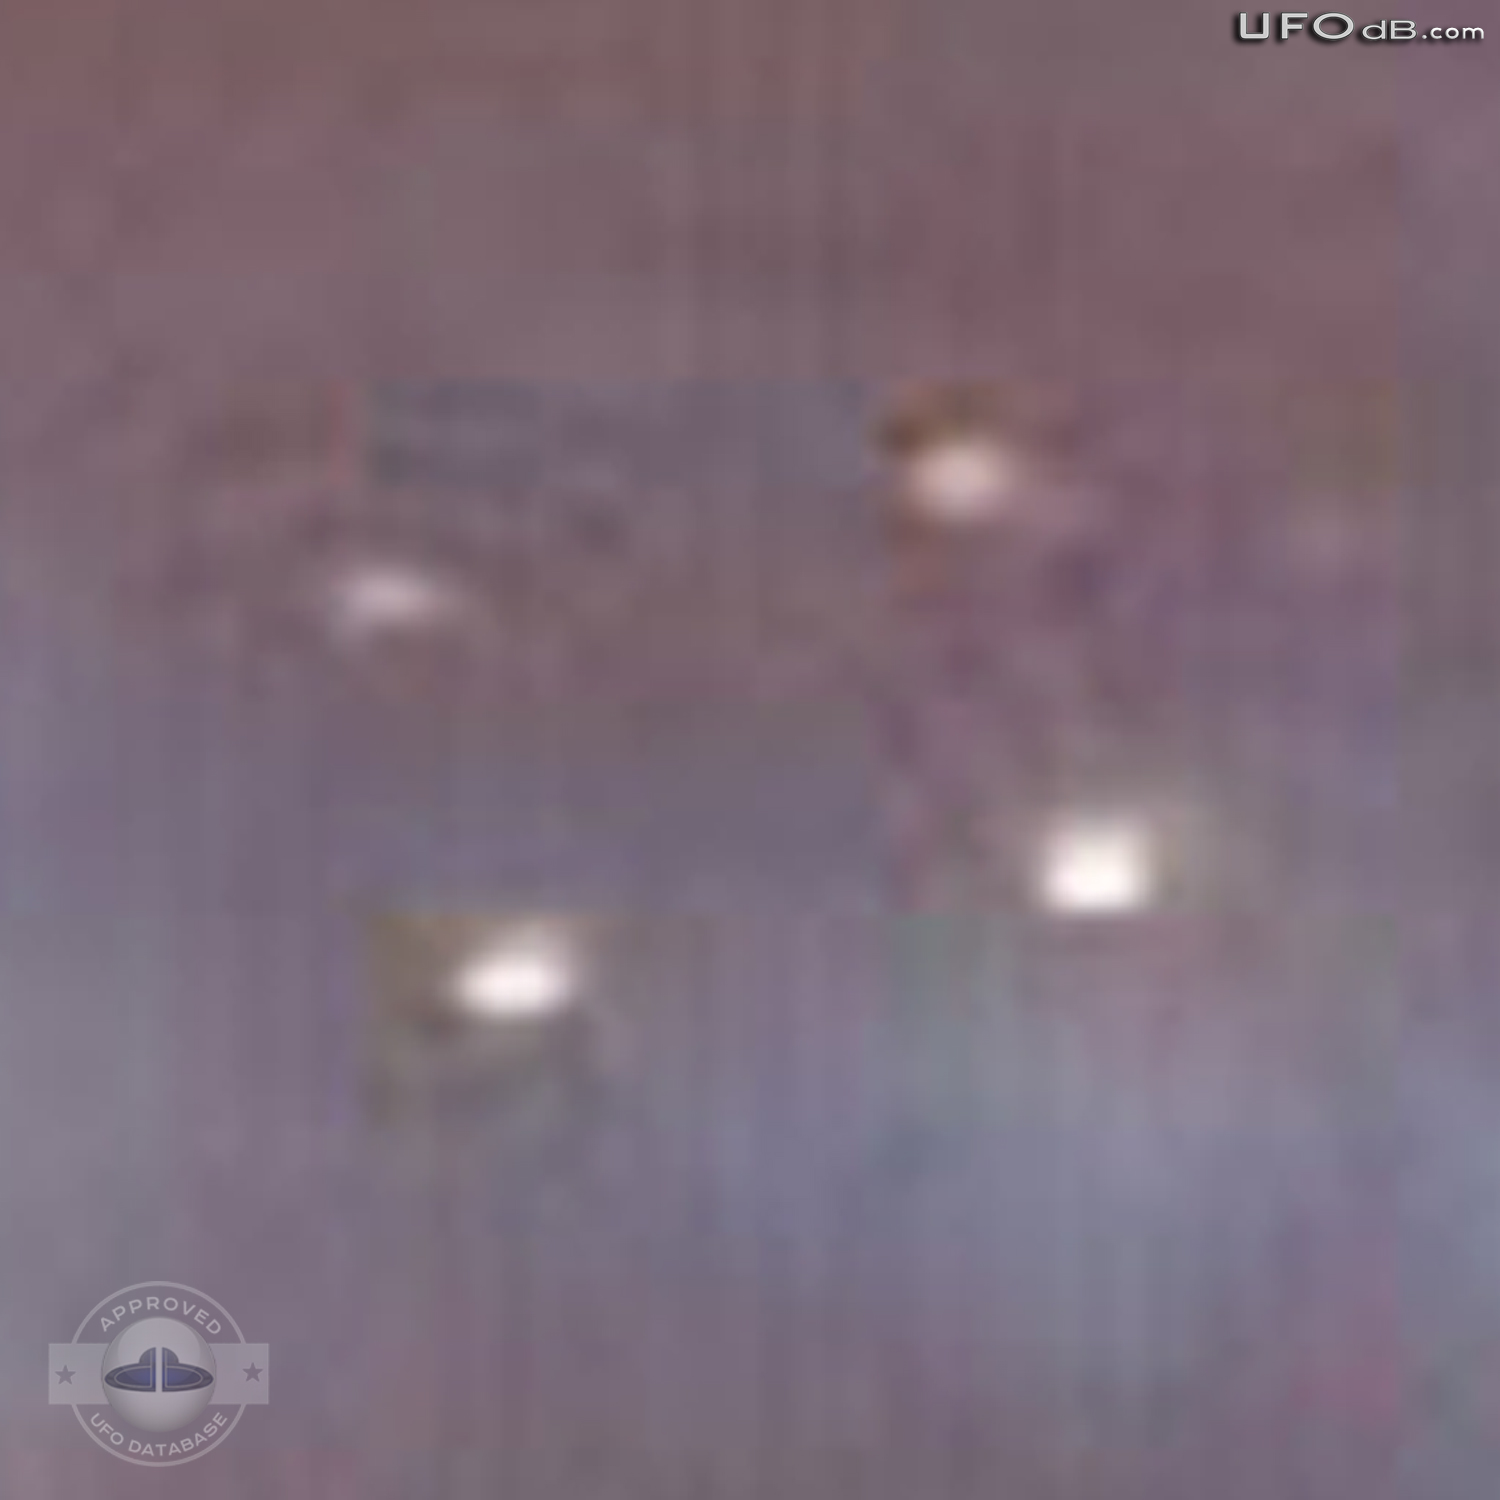 A picture from Madisonville show a UFO hiding in the clouds | USA 2011 UFO Picture #277-5